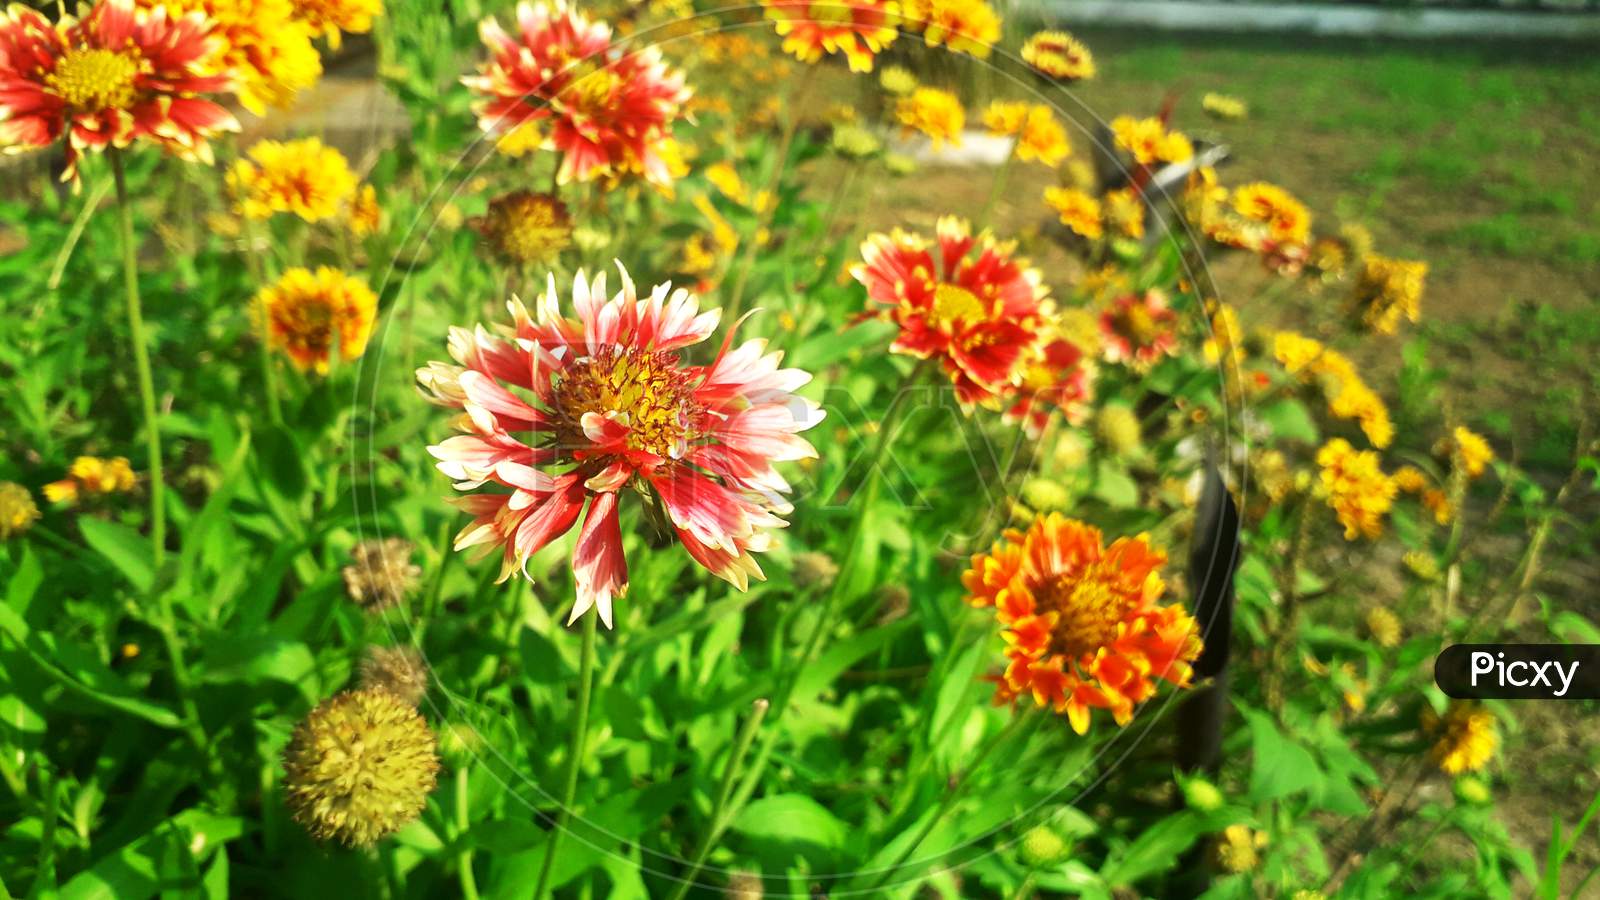 A flower bed containing various types of flowers